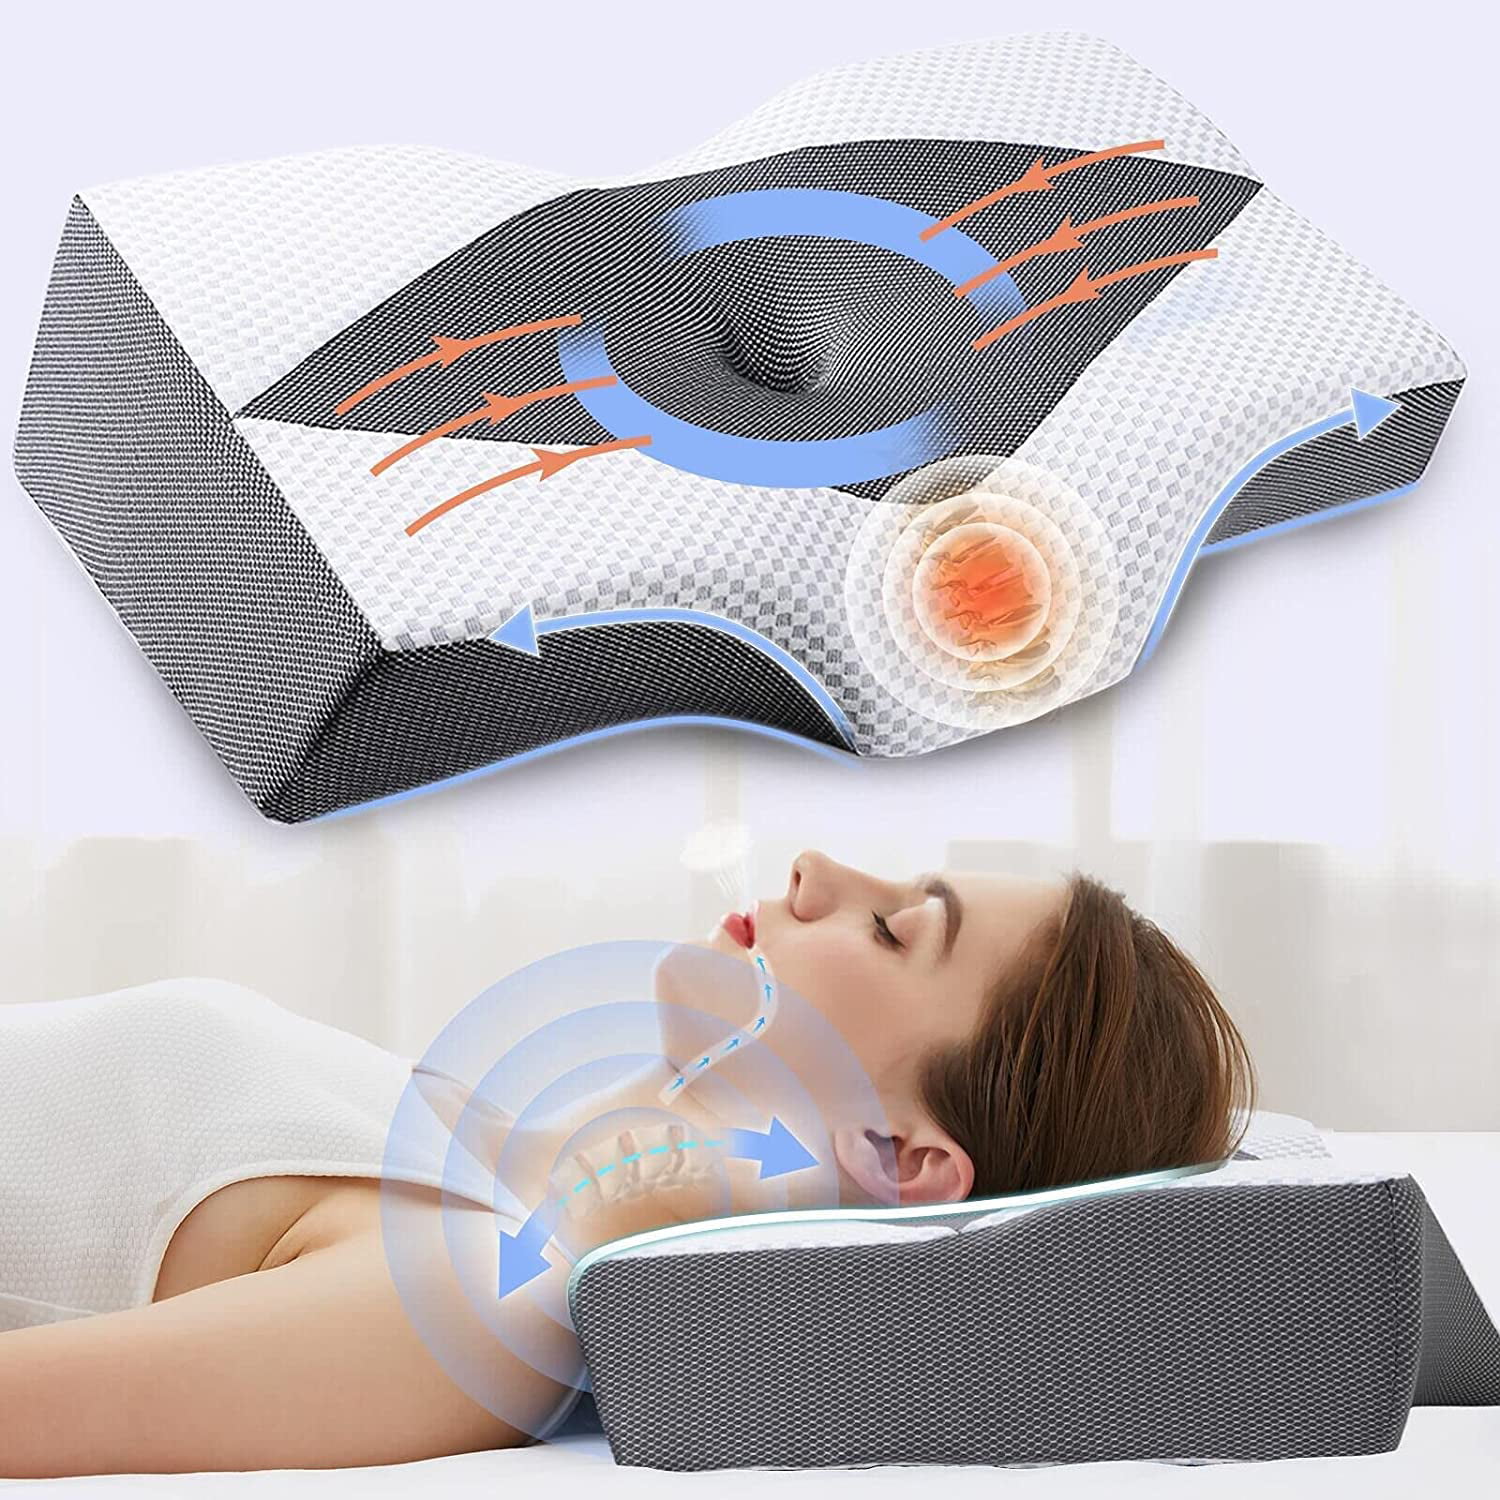 Cervical Pillow Contour Orthopedic Support Cervical for Neck Back Pain Relief US 